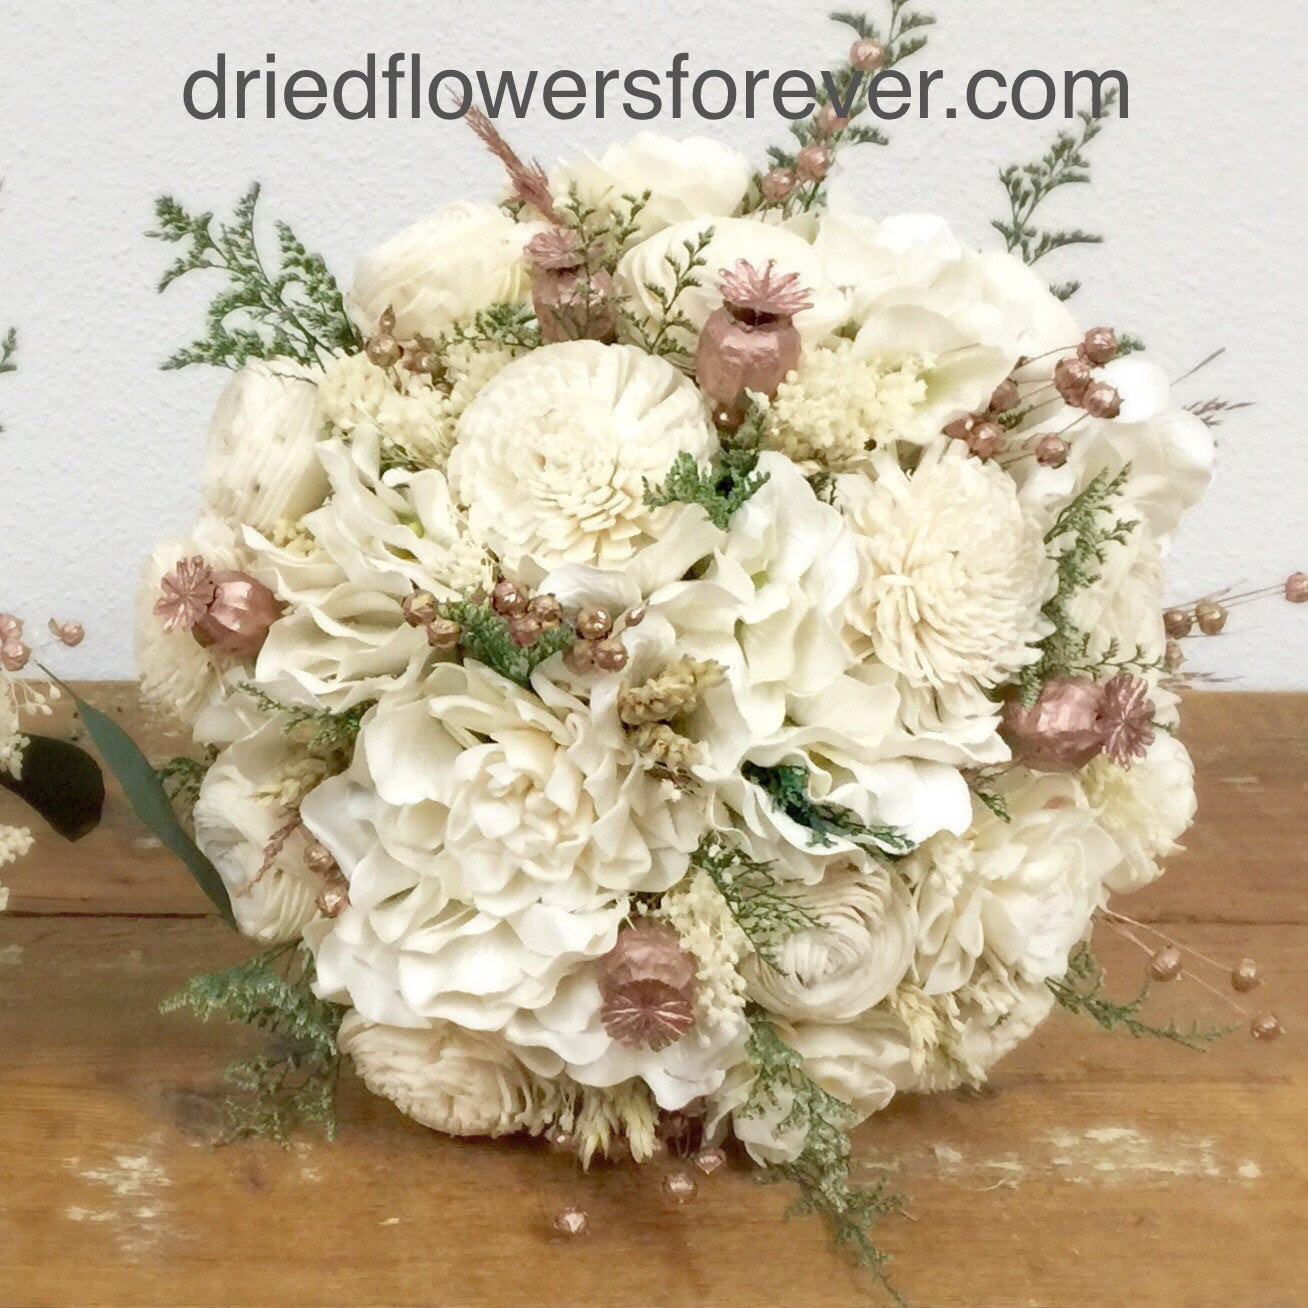 Gold Wedding Flowers
 Rose Gold Wedding Bouquet Preserved & Dried flowers Pink